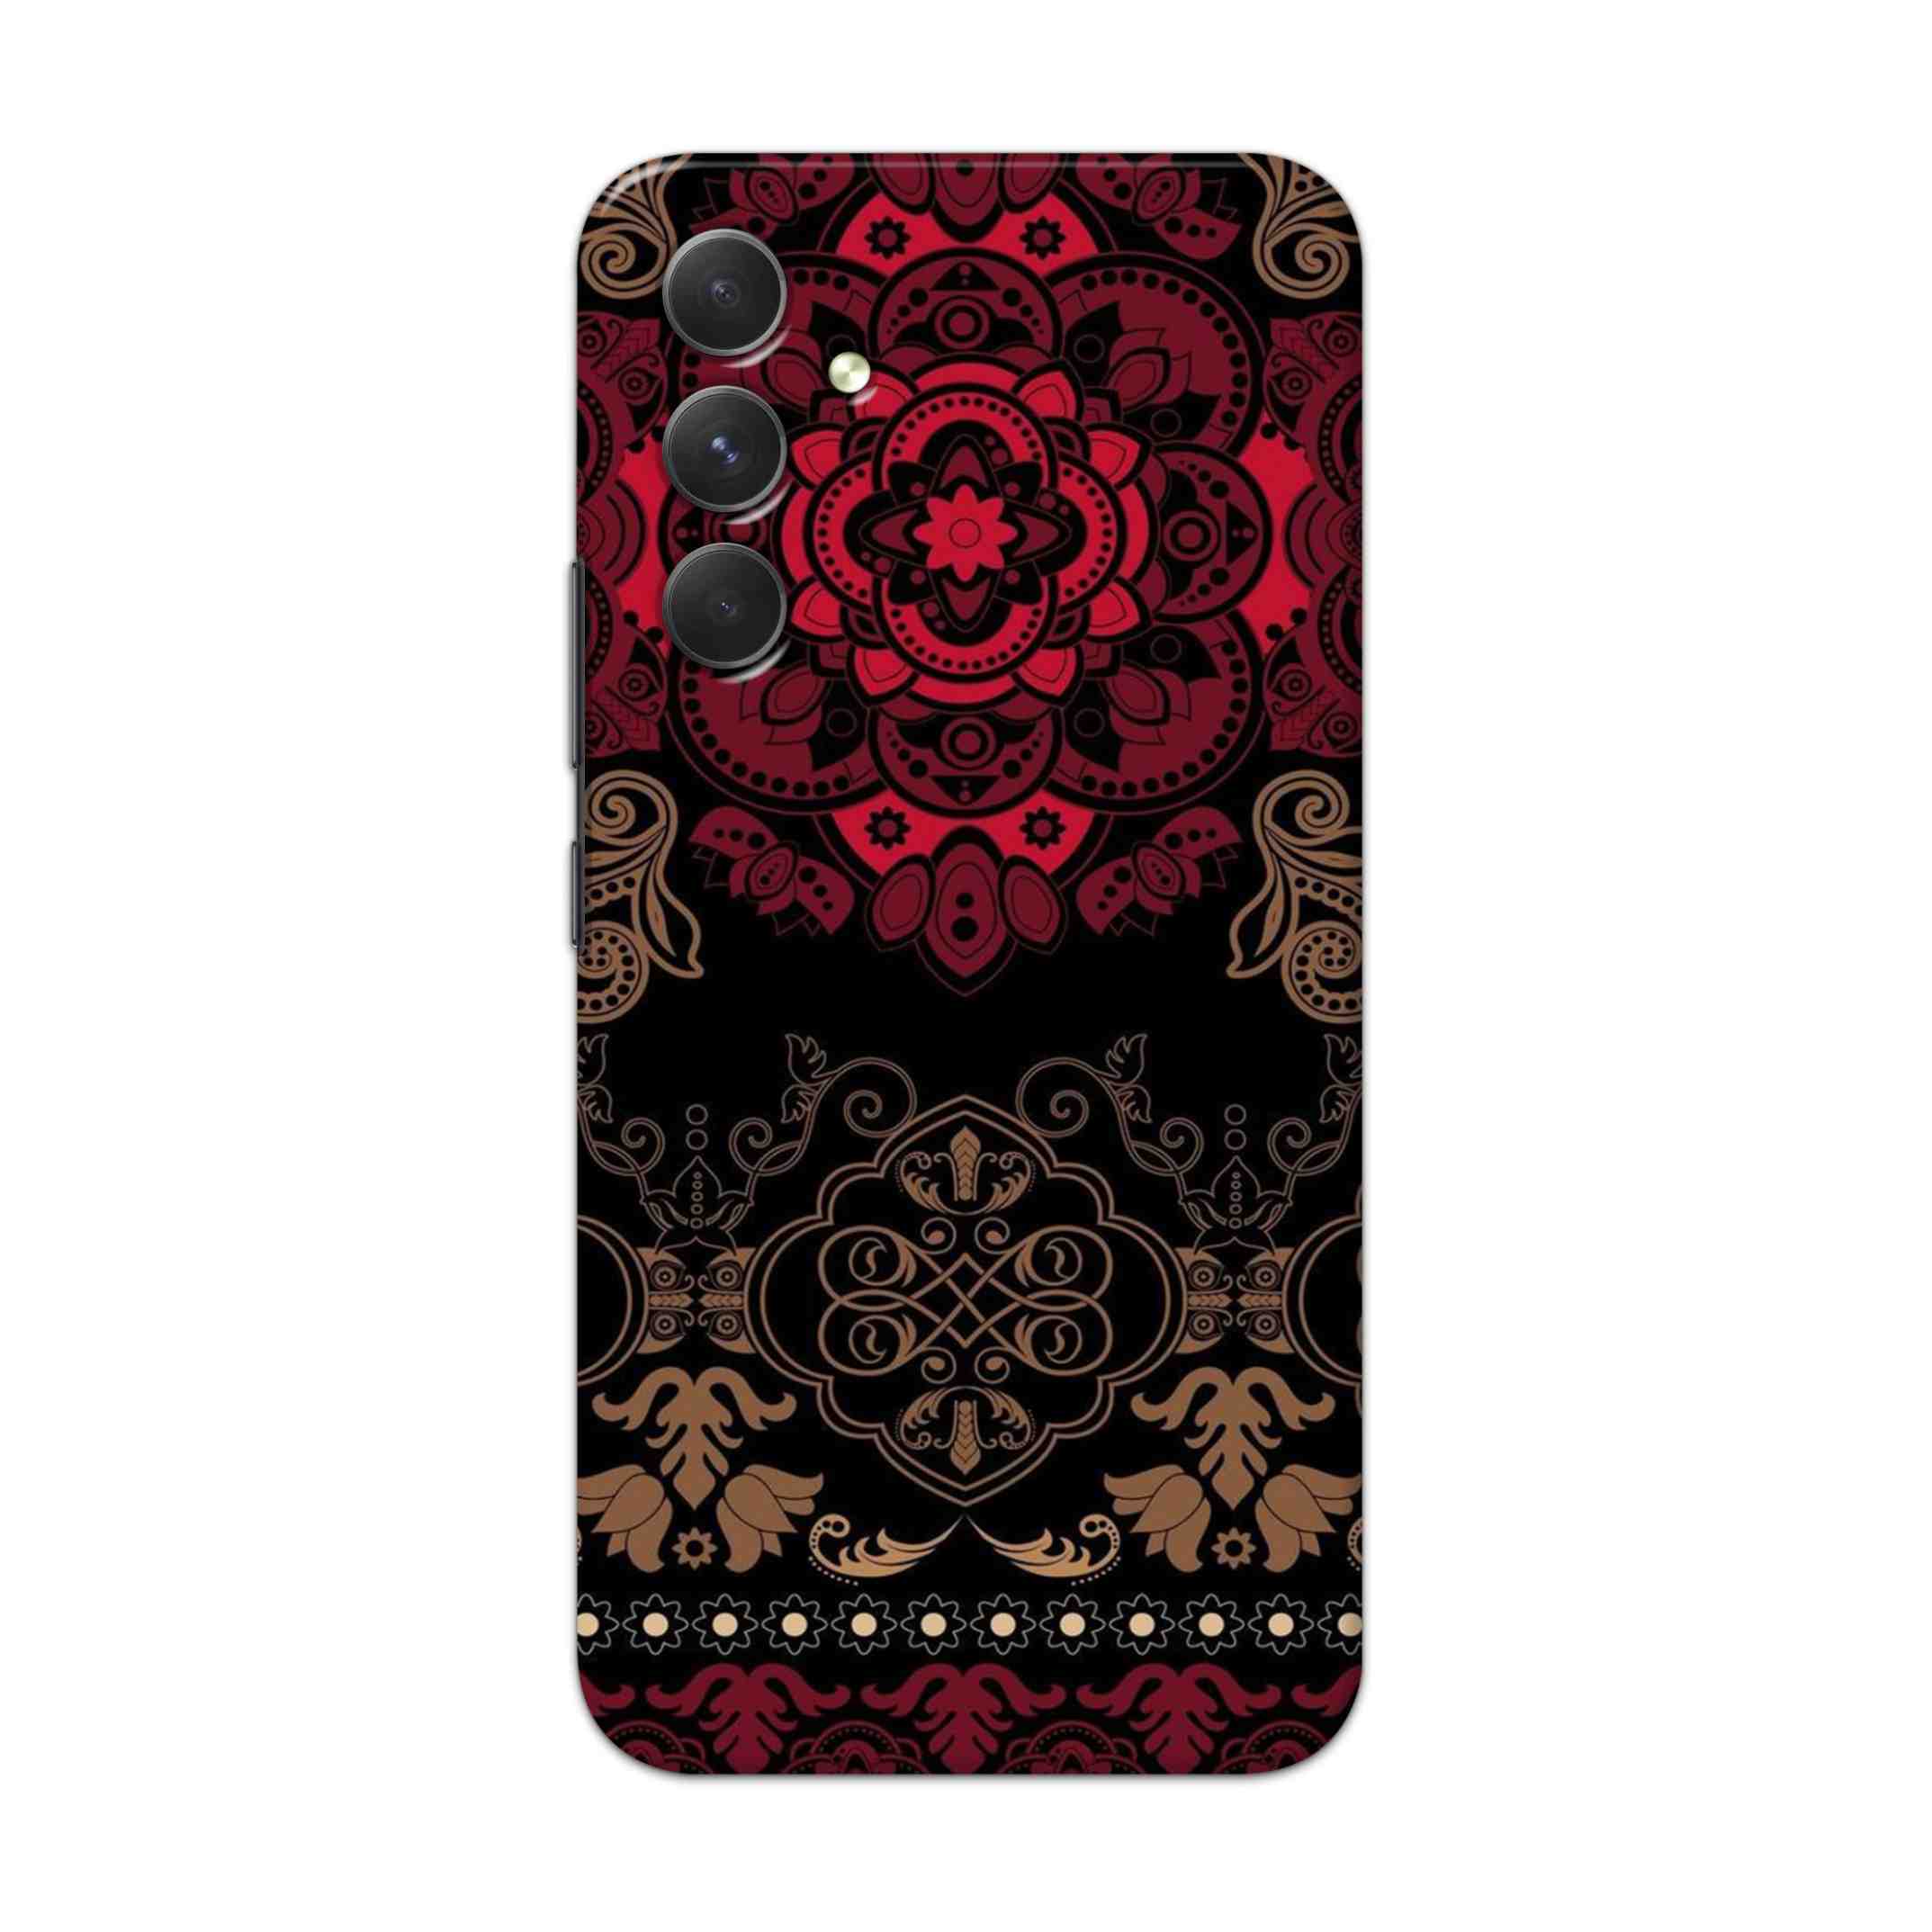 Buy Christian Mandalas Hard Back Mobile Phone Case Cover For Samsung Galaxy A54 5G Online